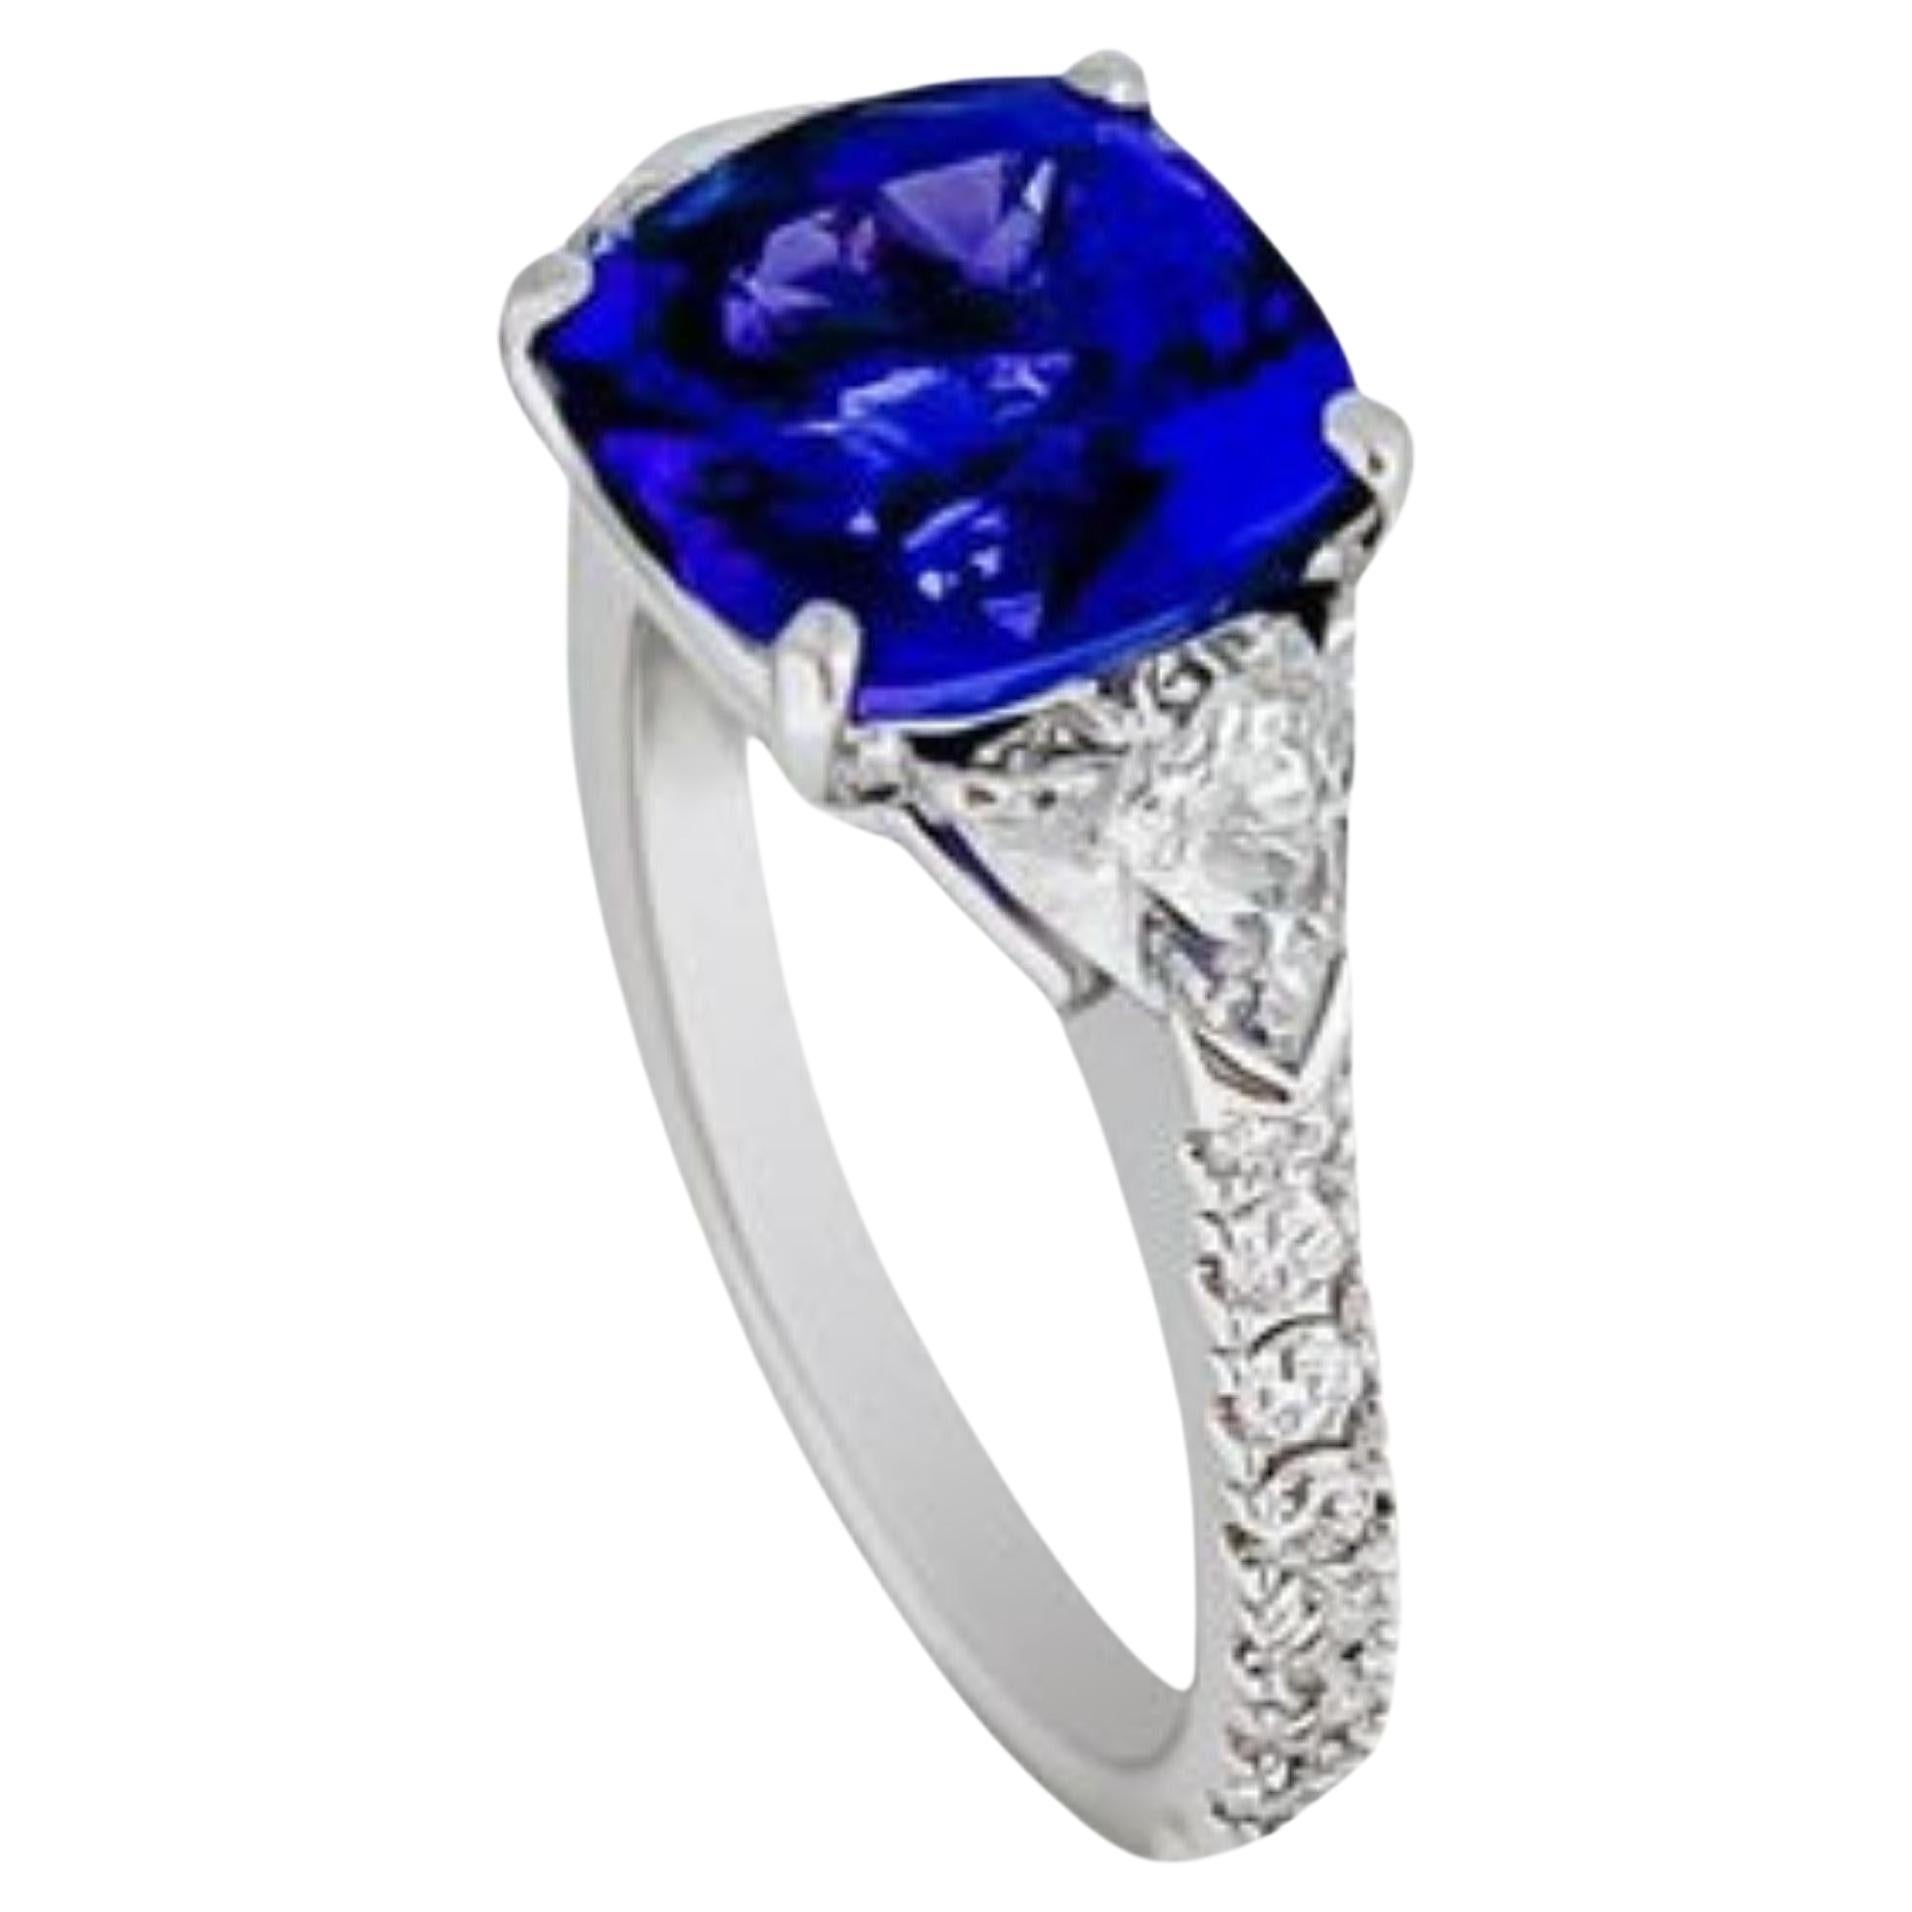 This stunning three stone ring has a 3.62ct tanzanite center stone, surrounded by half carat trillion cut diamonds in G VS1 quality. The band is set with G colored diamonds in 18k white gold. Truly a beautiful gemstone and ring. 

The ring is in a